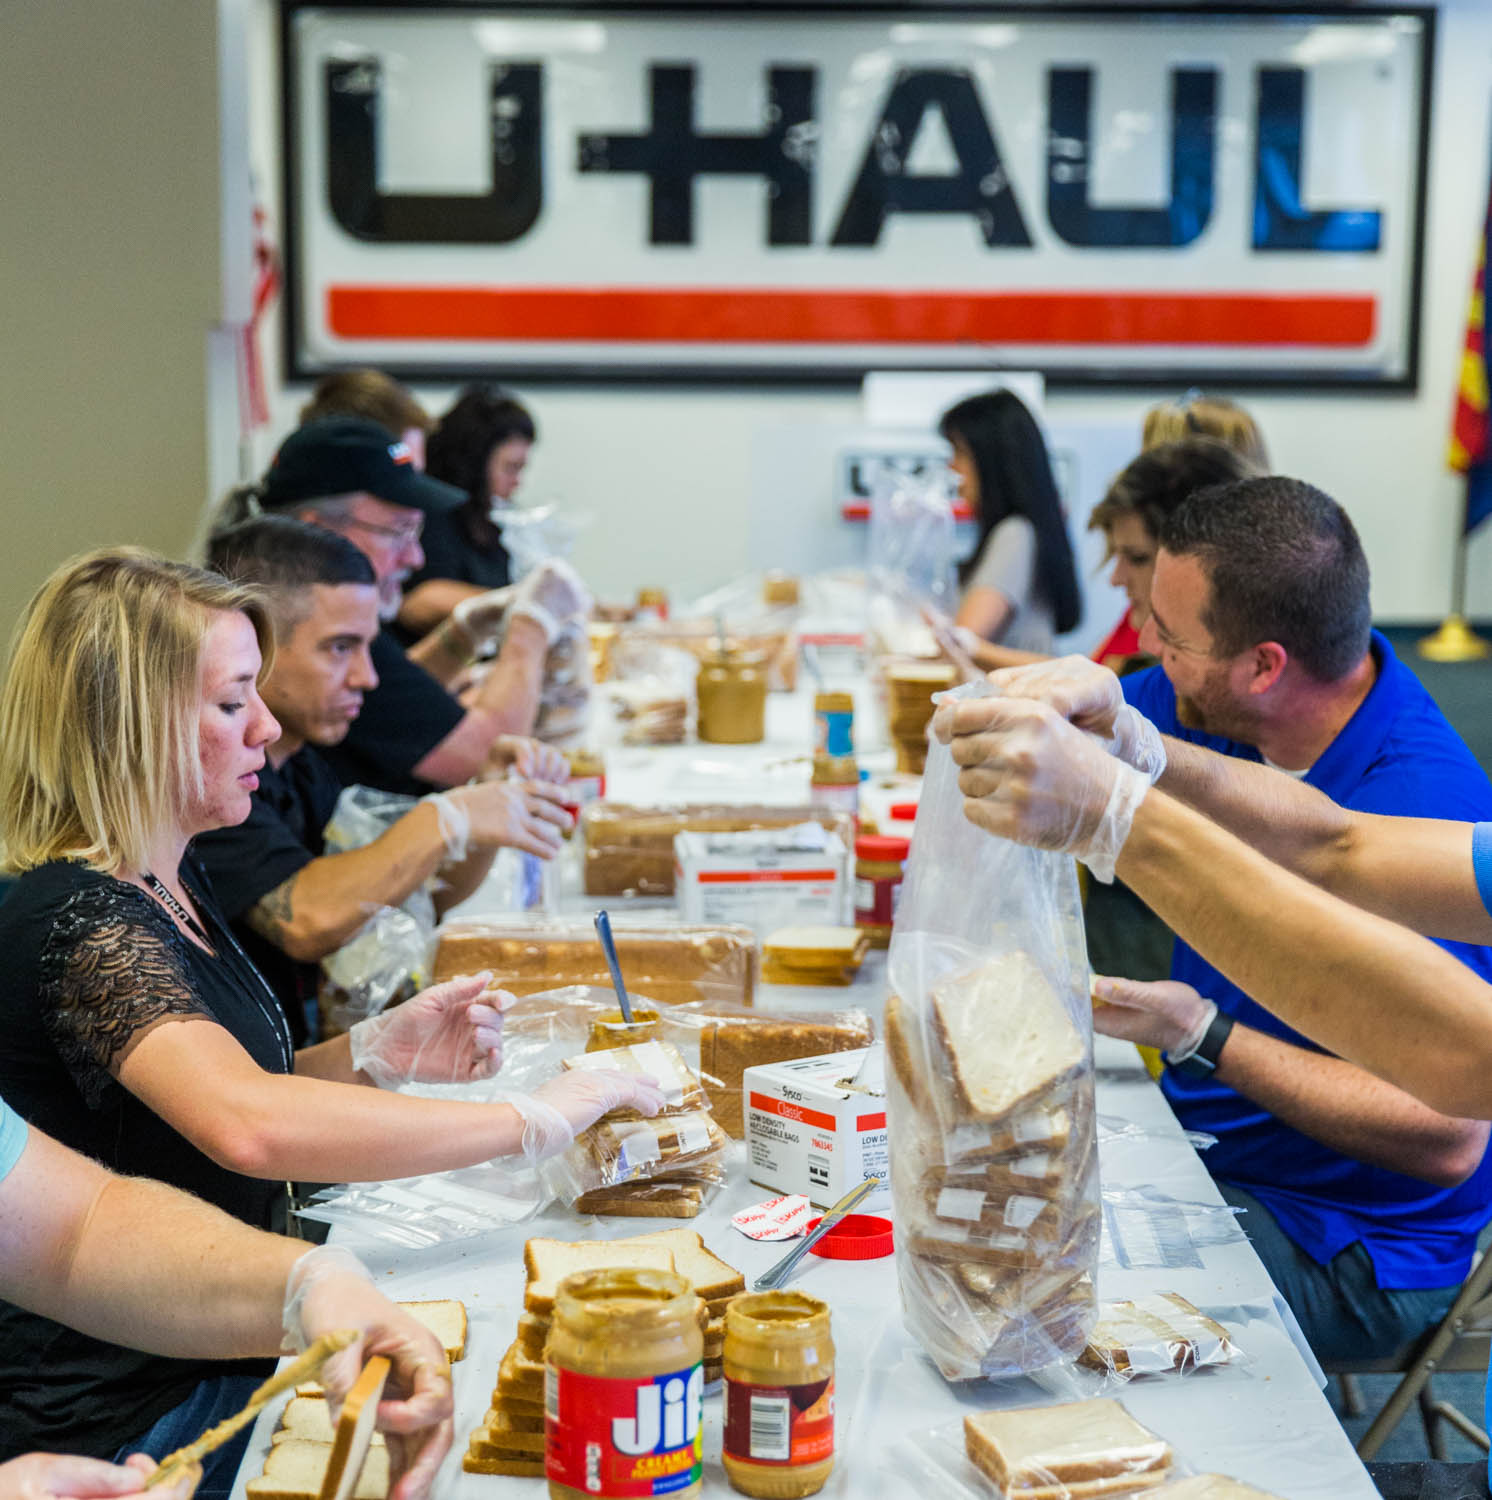 U-Haul Makes PB&J Lunches to Help Feed the Homeless